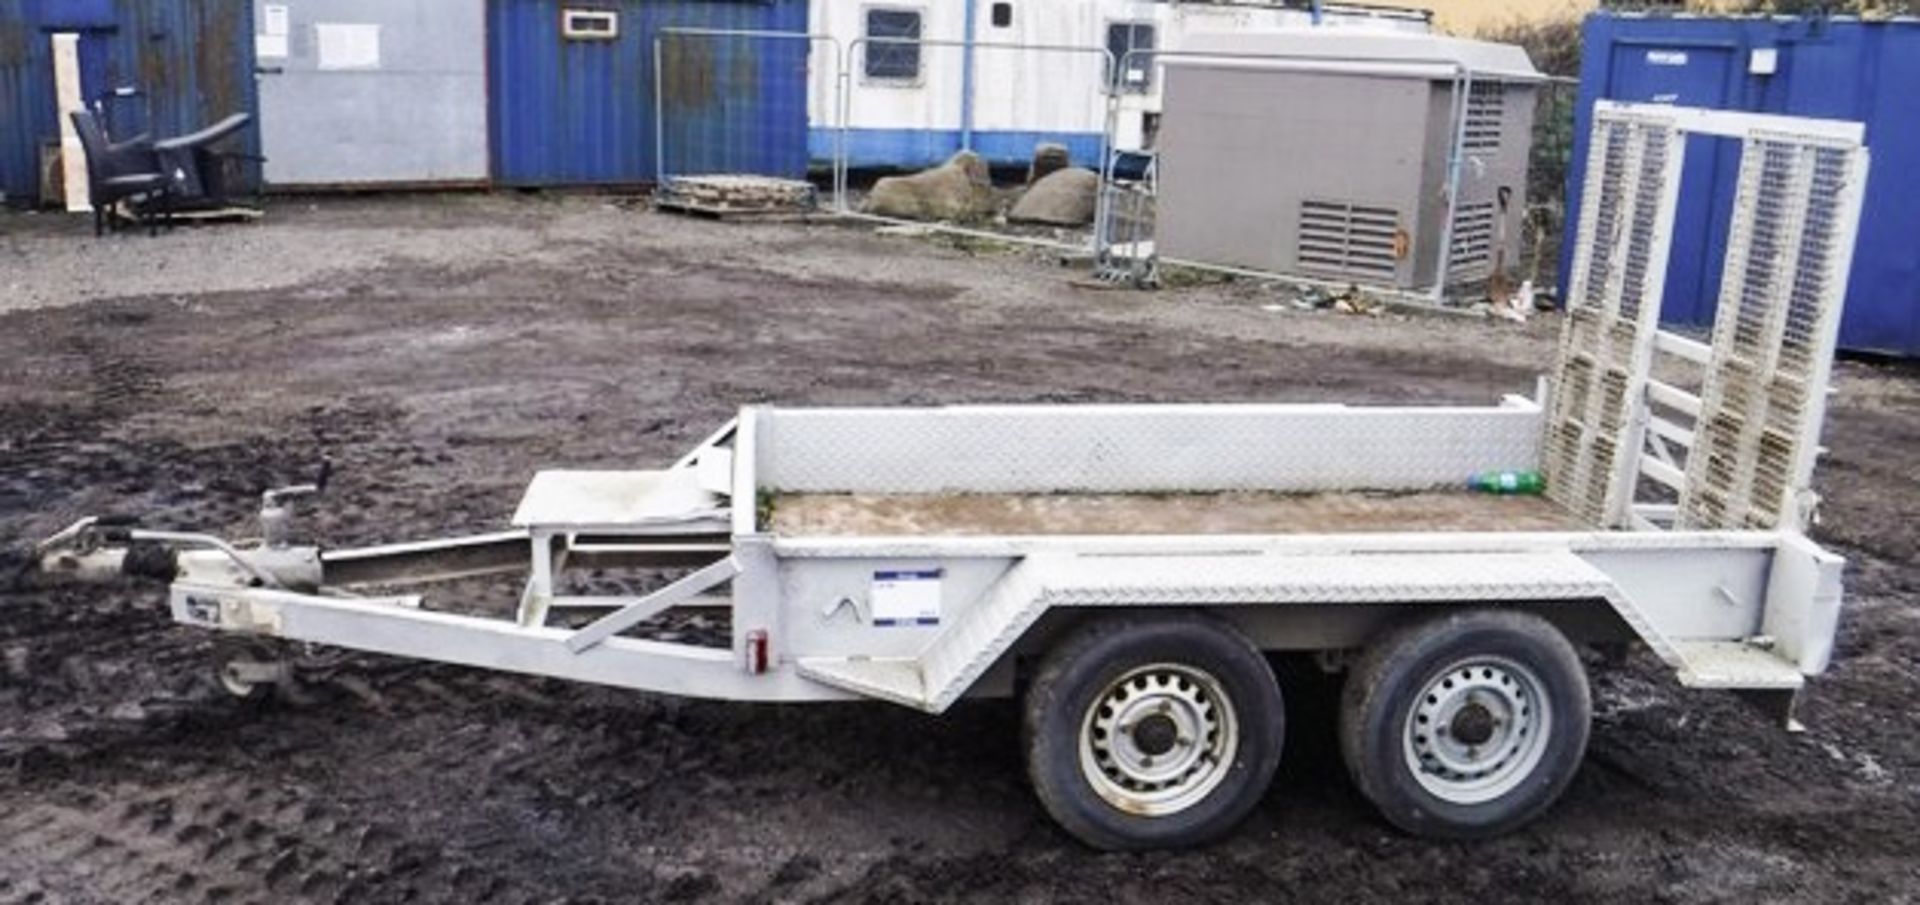 INDESPENSION 8' X 5' TWIN AXLE PLANT TRAILER WITH MESH RAMP, S/N G06600317 - Bild 3 aus 4